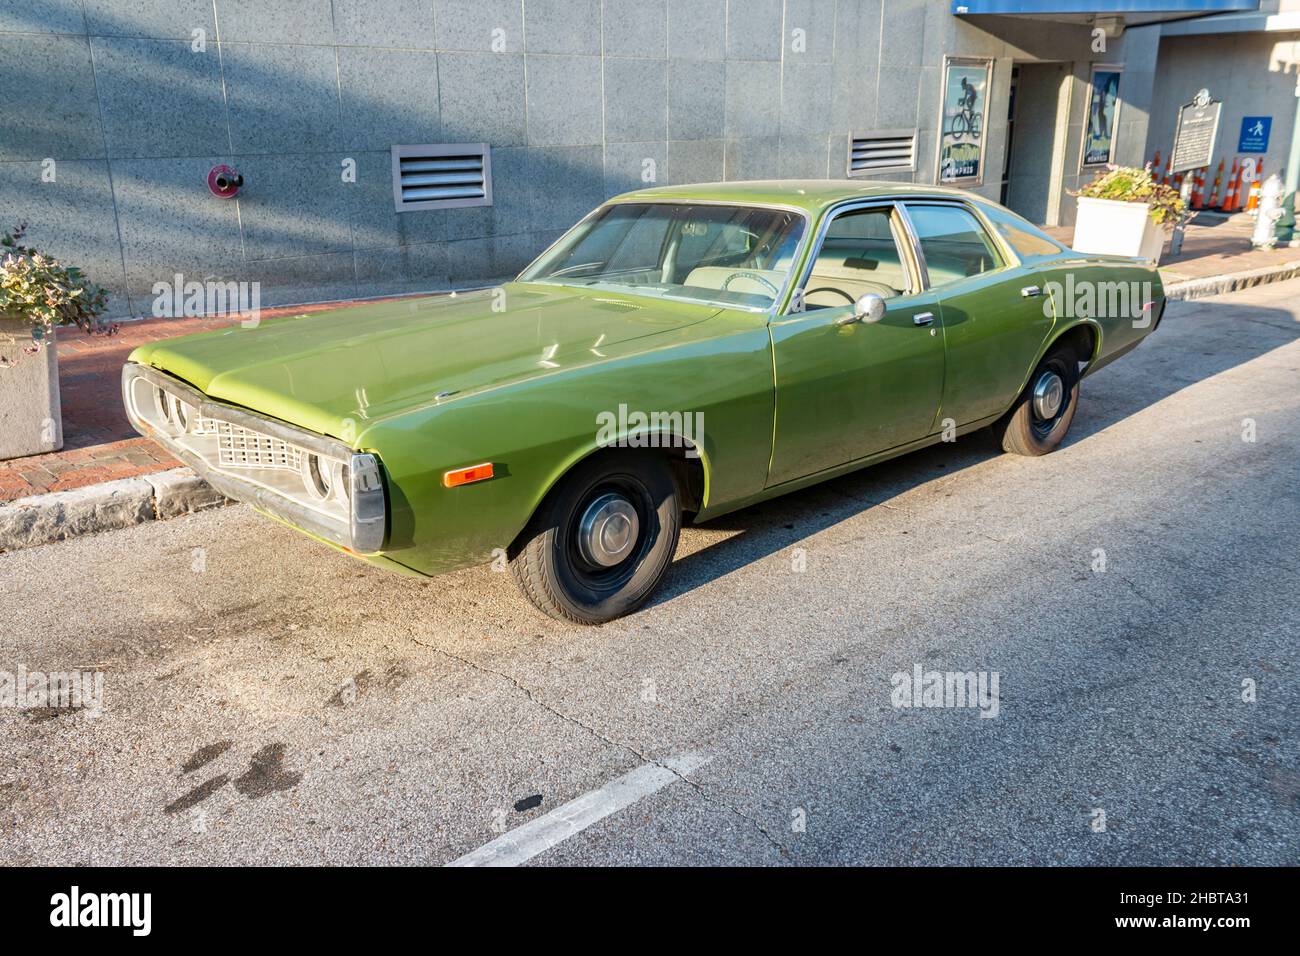 1972 1973 dodge coronet in street in Memphis tennessee Stock Photo